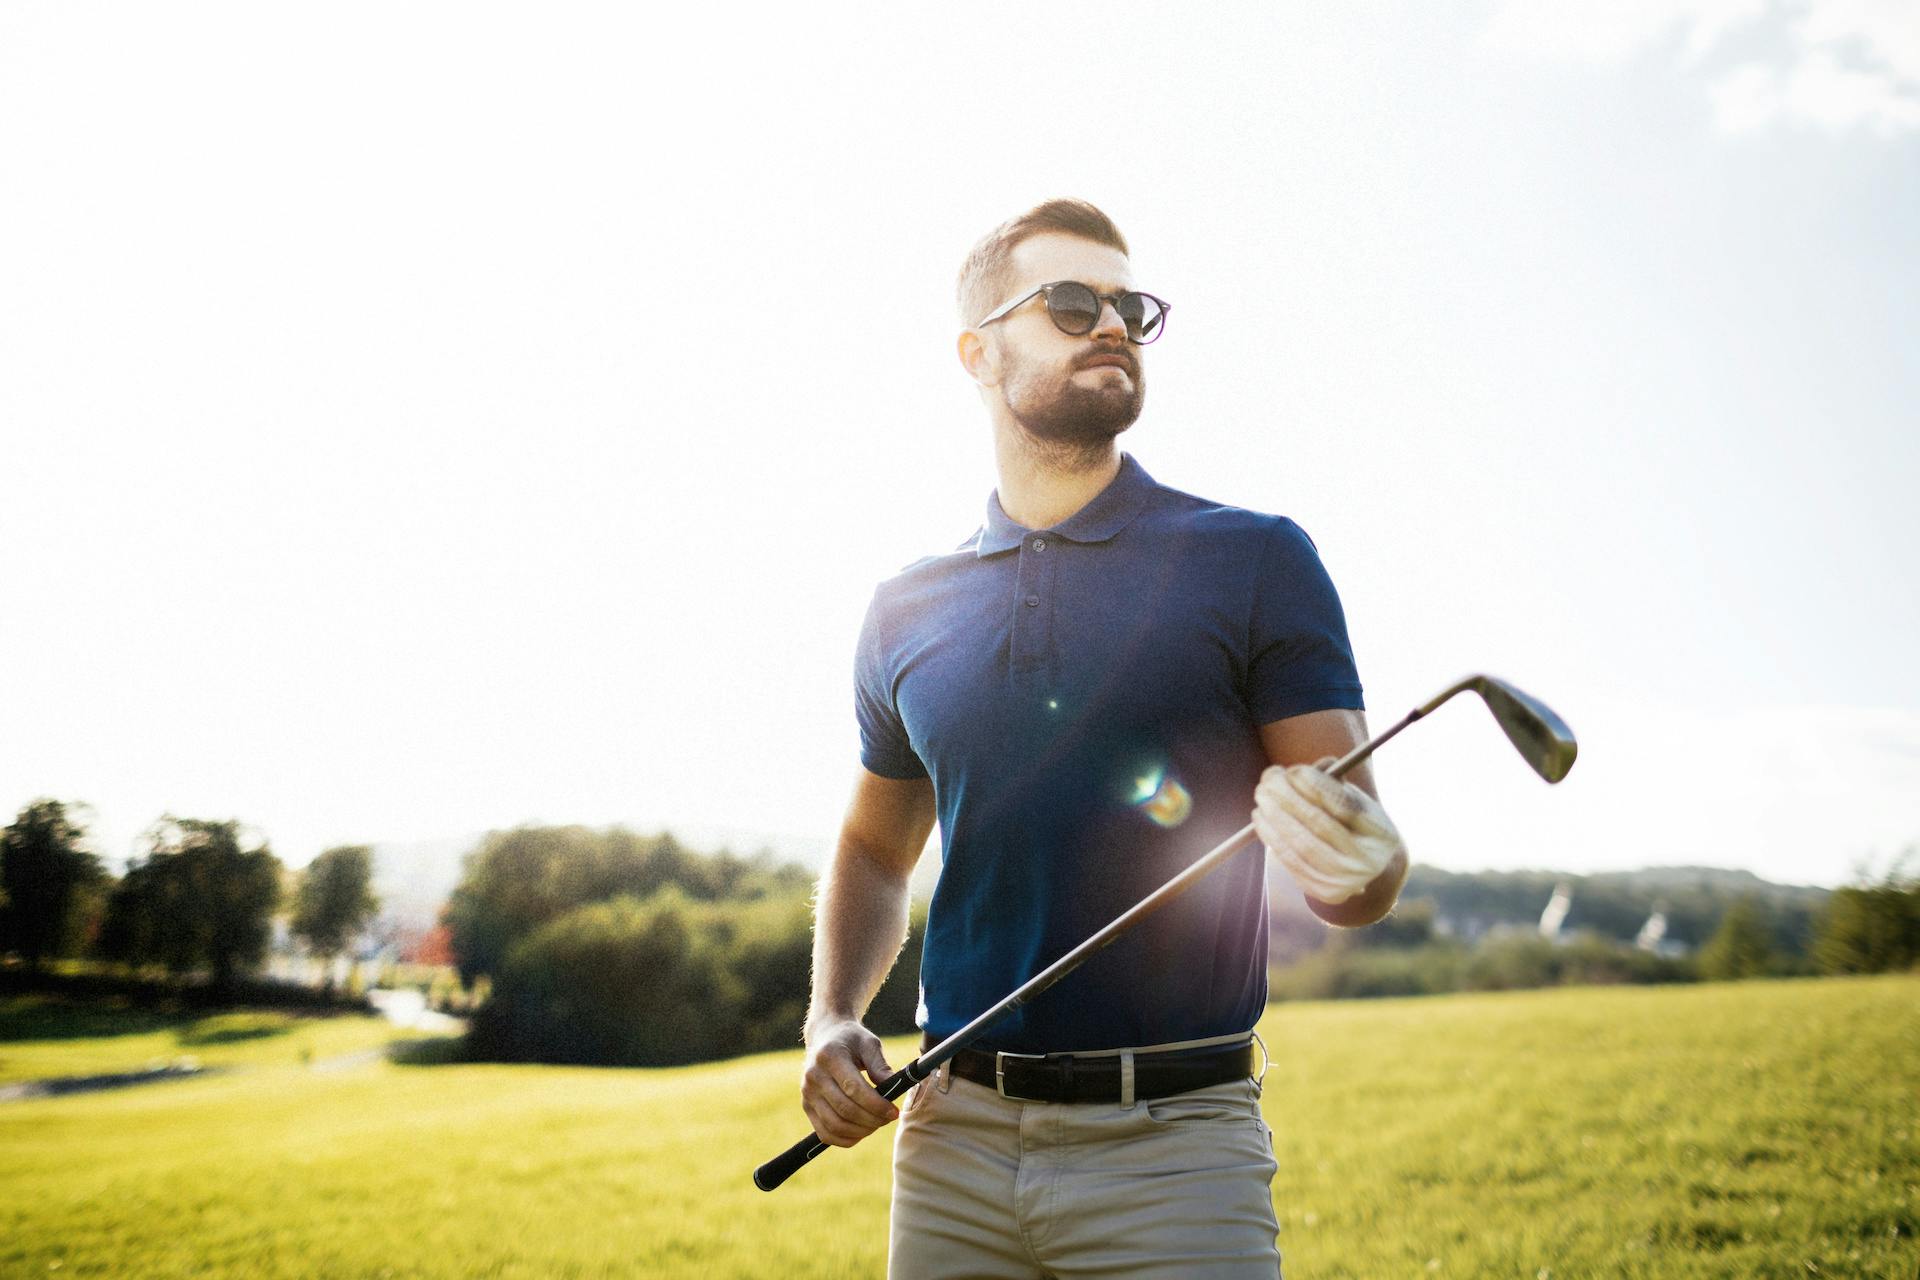 Young man in sunglasses standing on a golf course holding a golf club